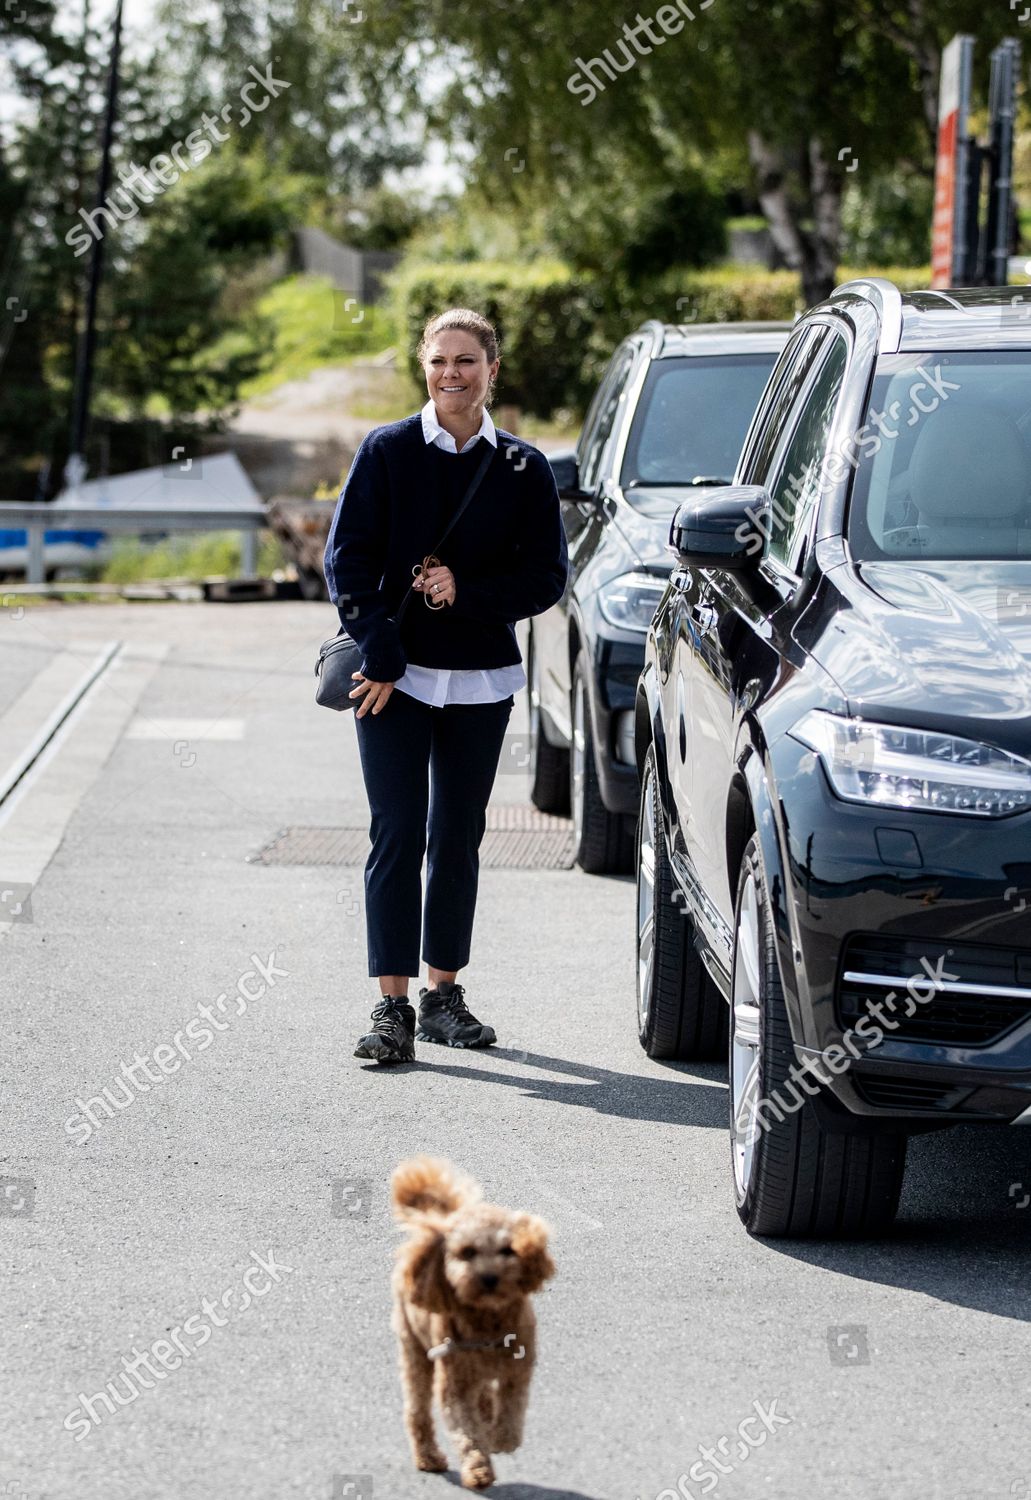 crown-princess-victoria-and-her-dog-rio-visit-alo-and-uto-sweden-shutterstock-editorial-12361980i.jpg